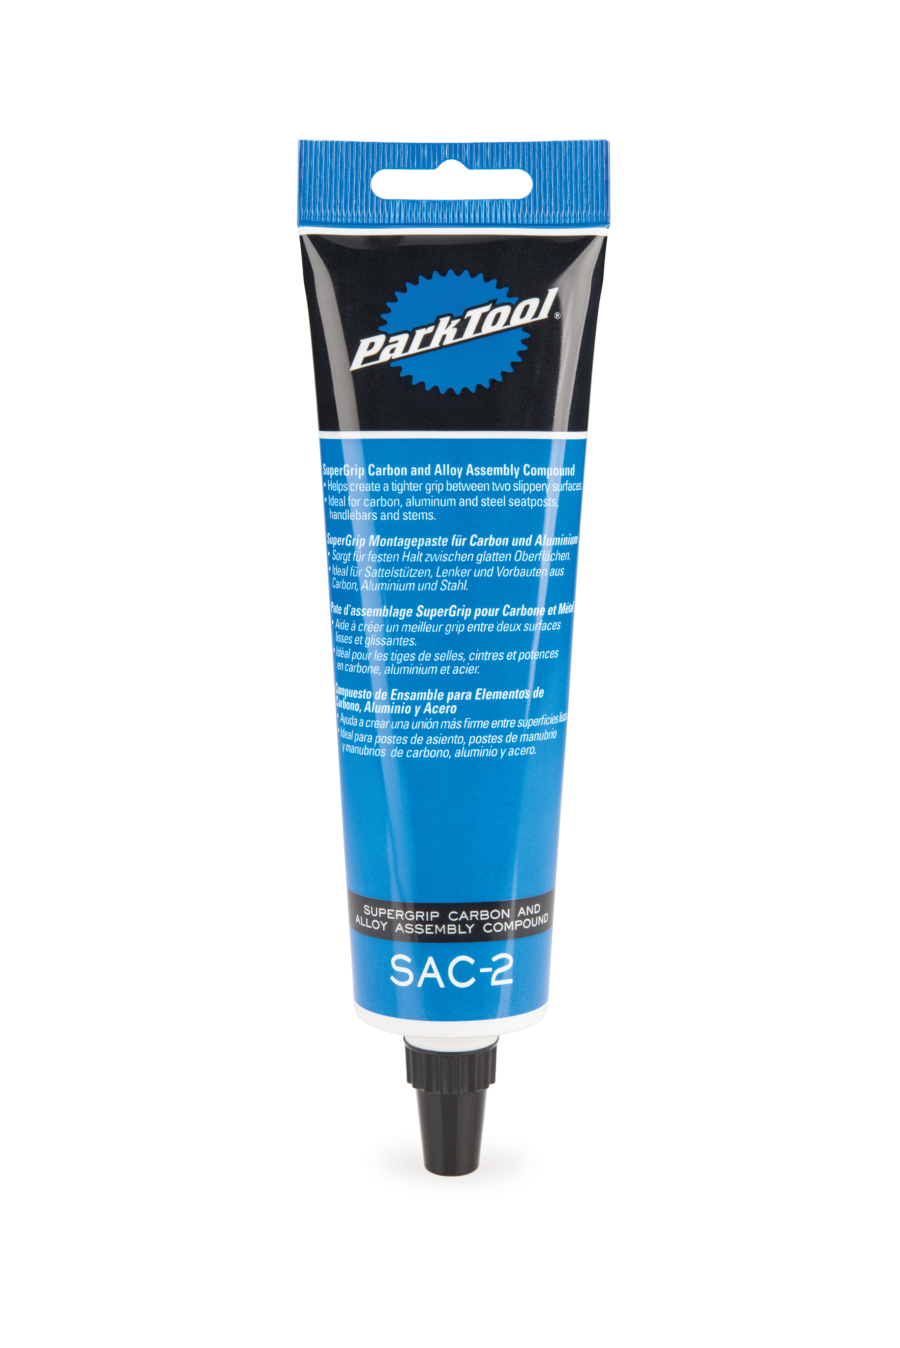 The Park Tool SAC-2 SuperGrip™ Carbon and Alloy Assembly Compound, enlarged